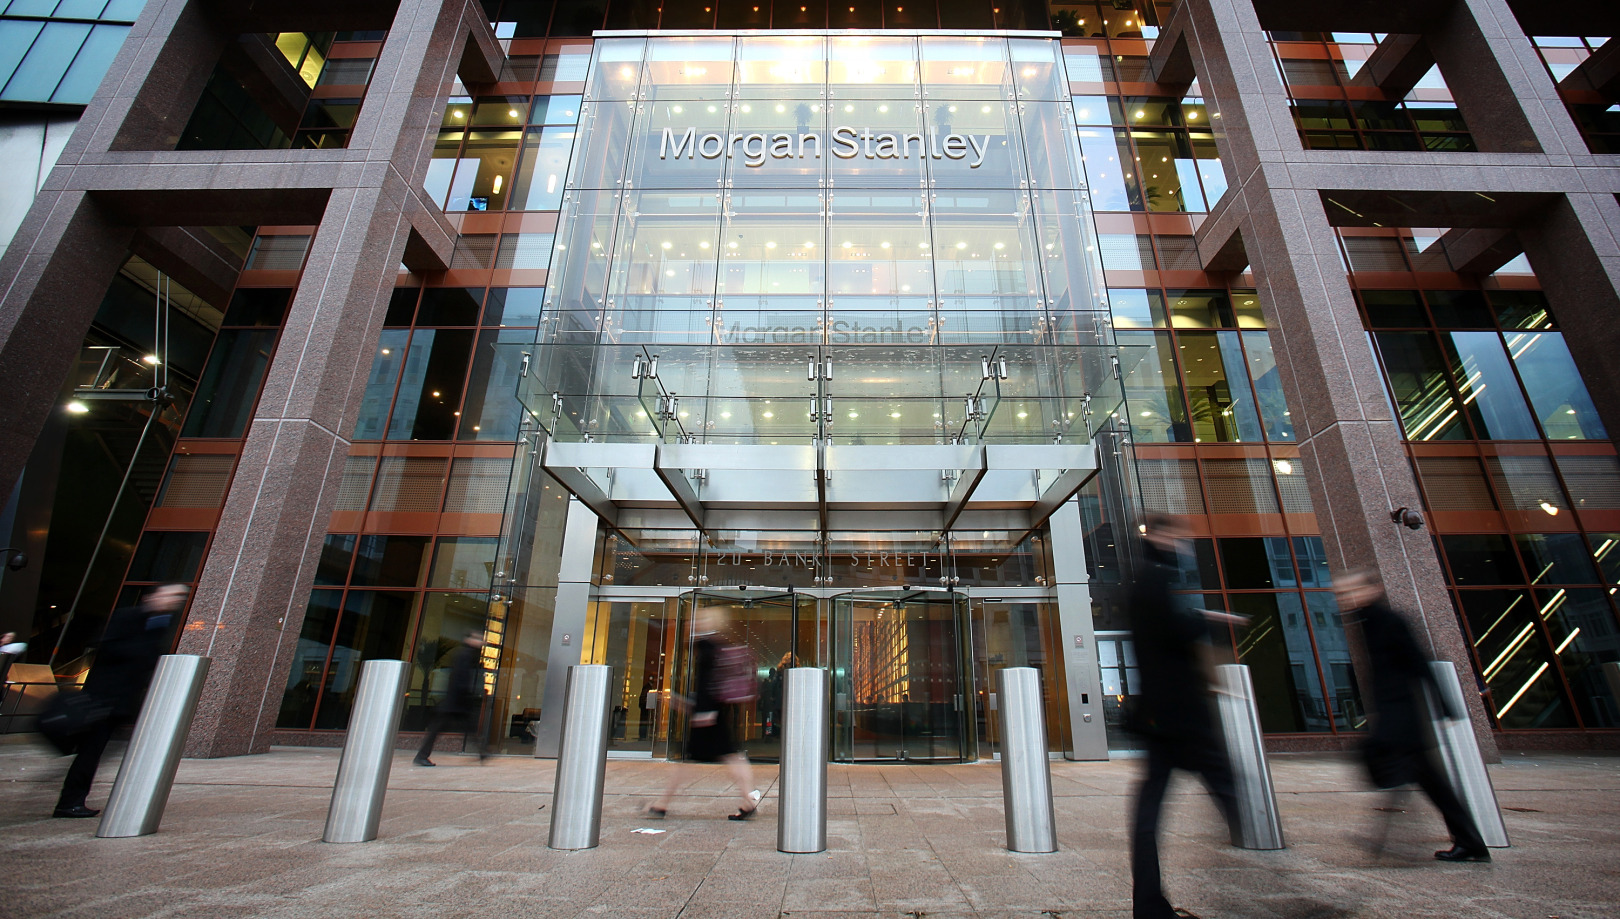 Pedestrians pass the Morgan Stanley headquarters at Canary Wharf in London.